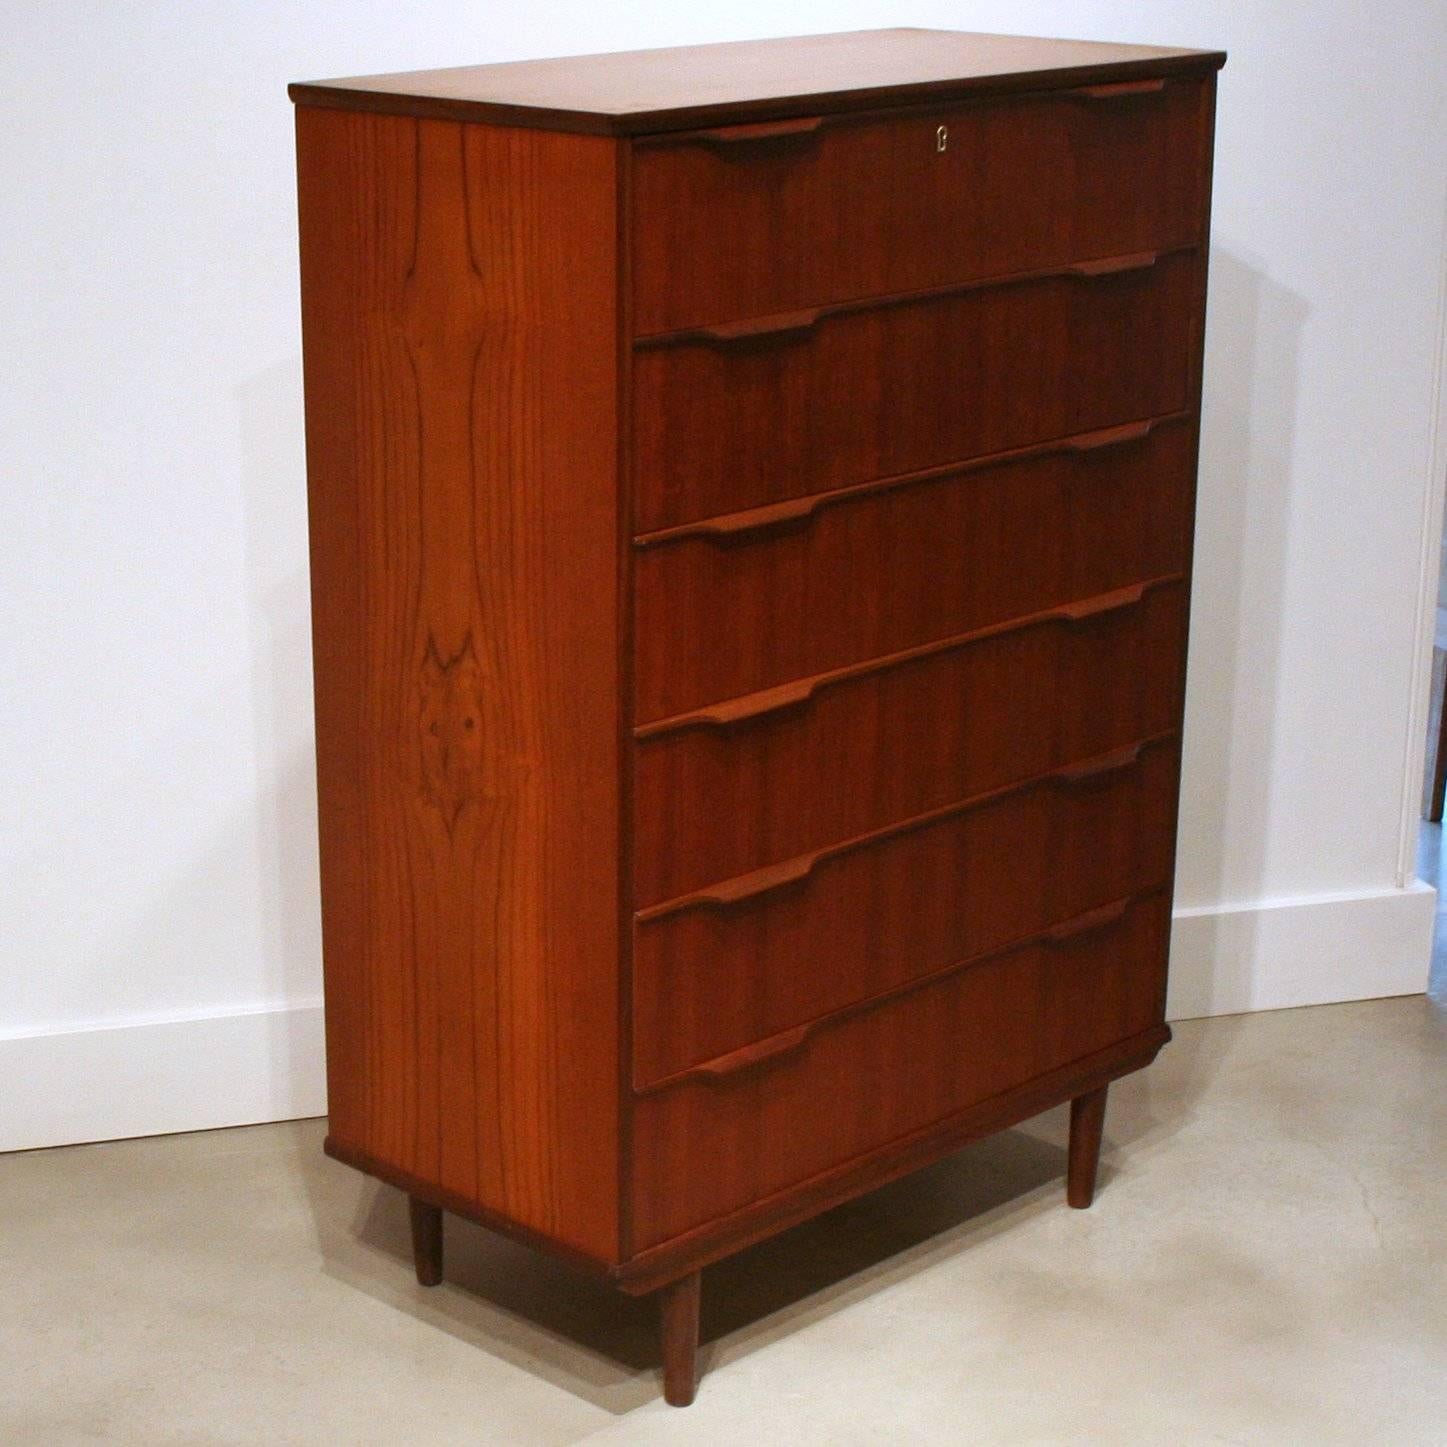 Stunning teak dresser featuring conical teak legs, crafted drawer pulls, and dove-tail construction. These dressers add character and warmth to your modern bedroom. Made in Denmark.